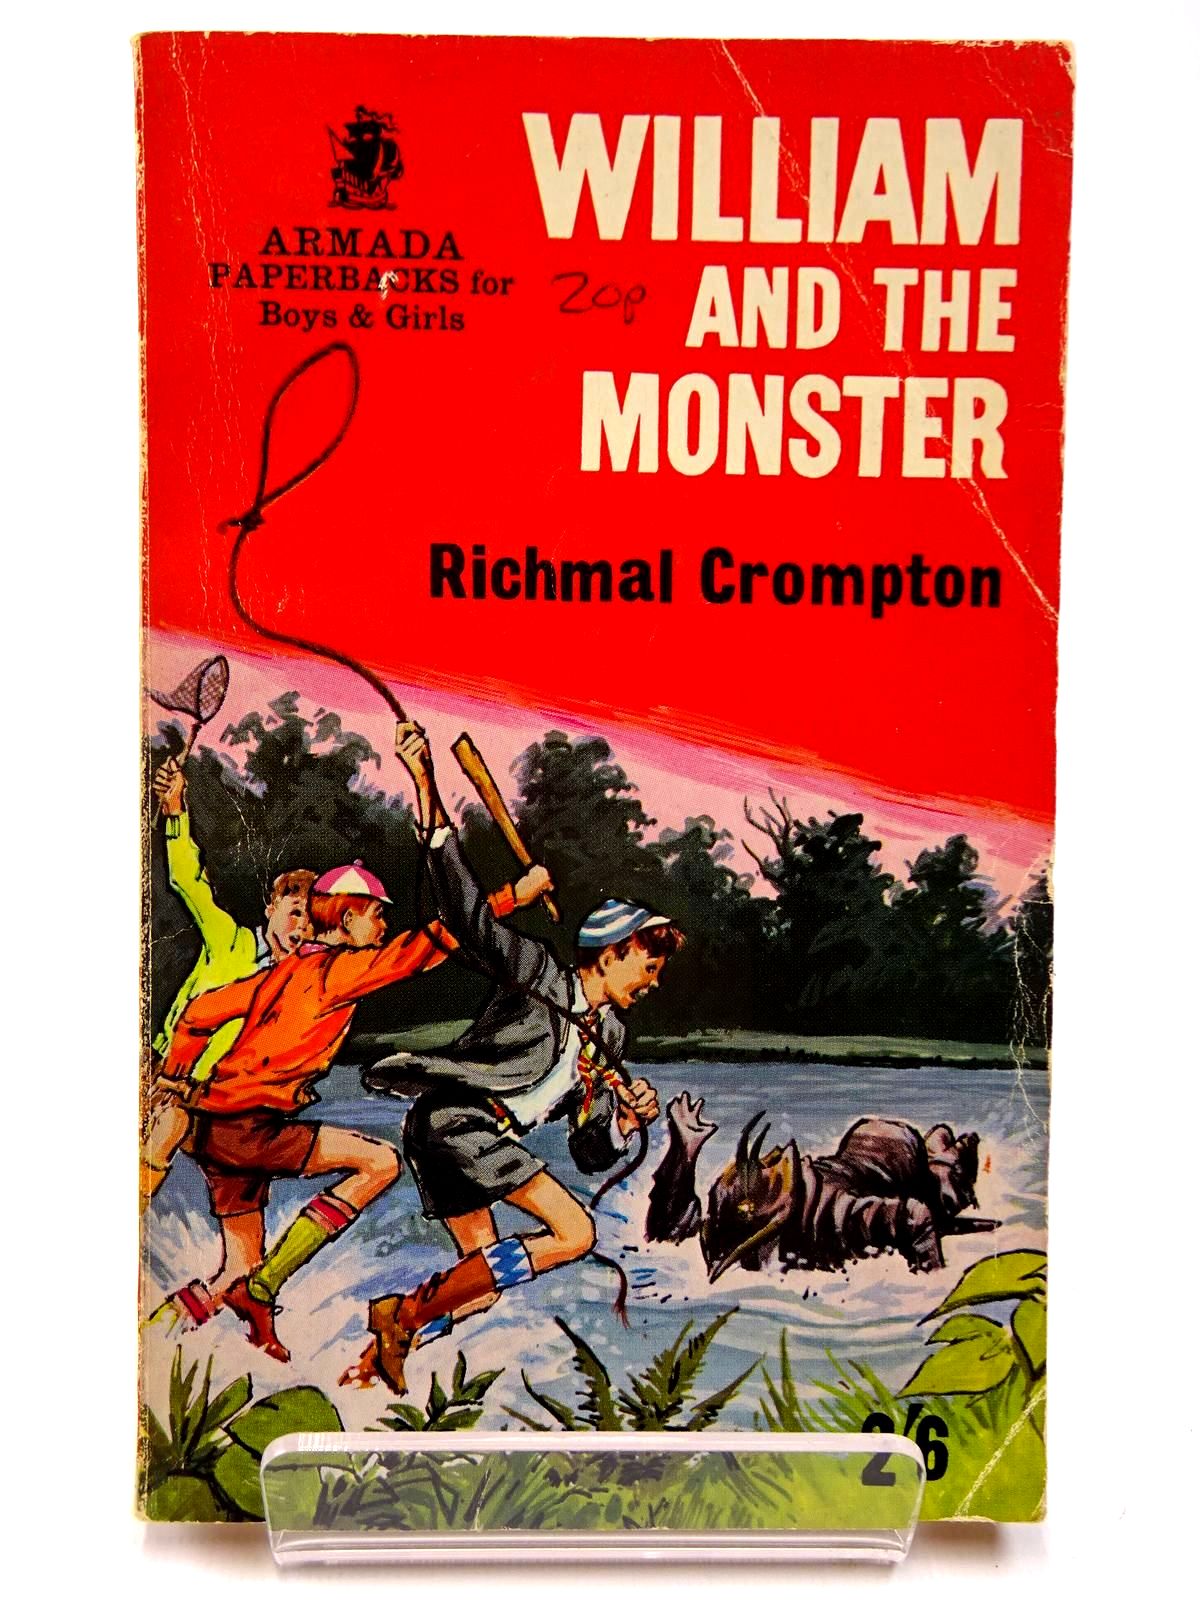 Photo of WILLIAM AND THE MONSTER written by Crompton, Richmal illustrated by Archer, Peter published by Armada (STOCK CODE: 2130552)  for sale by Stella & Rose's Books